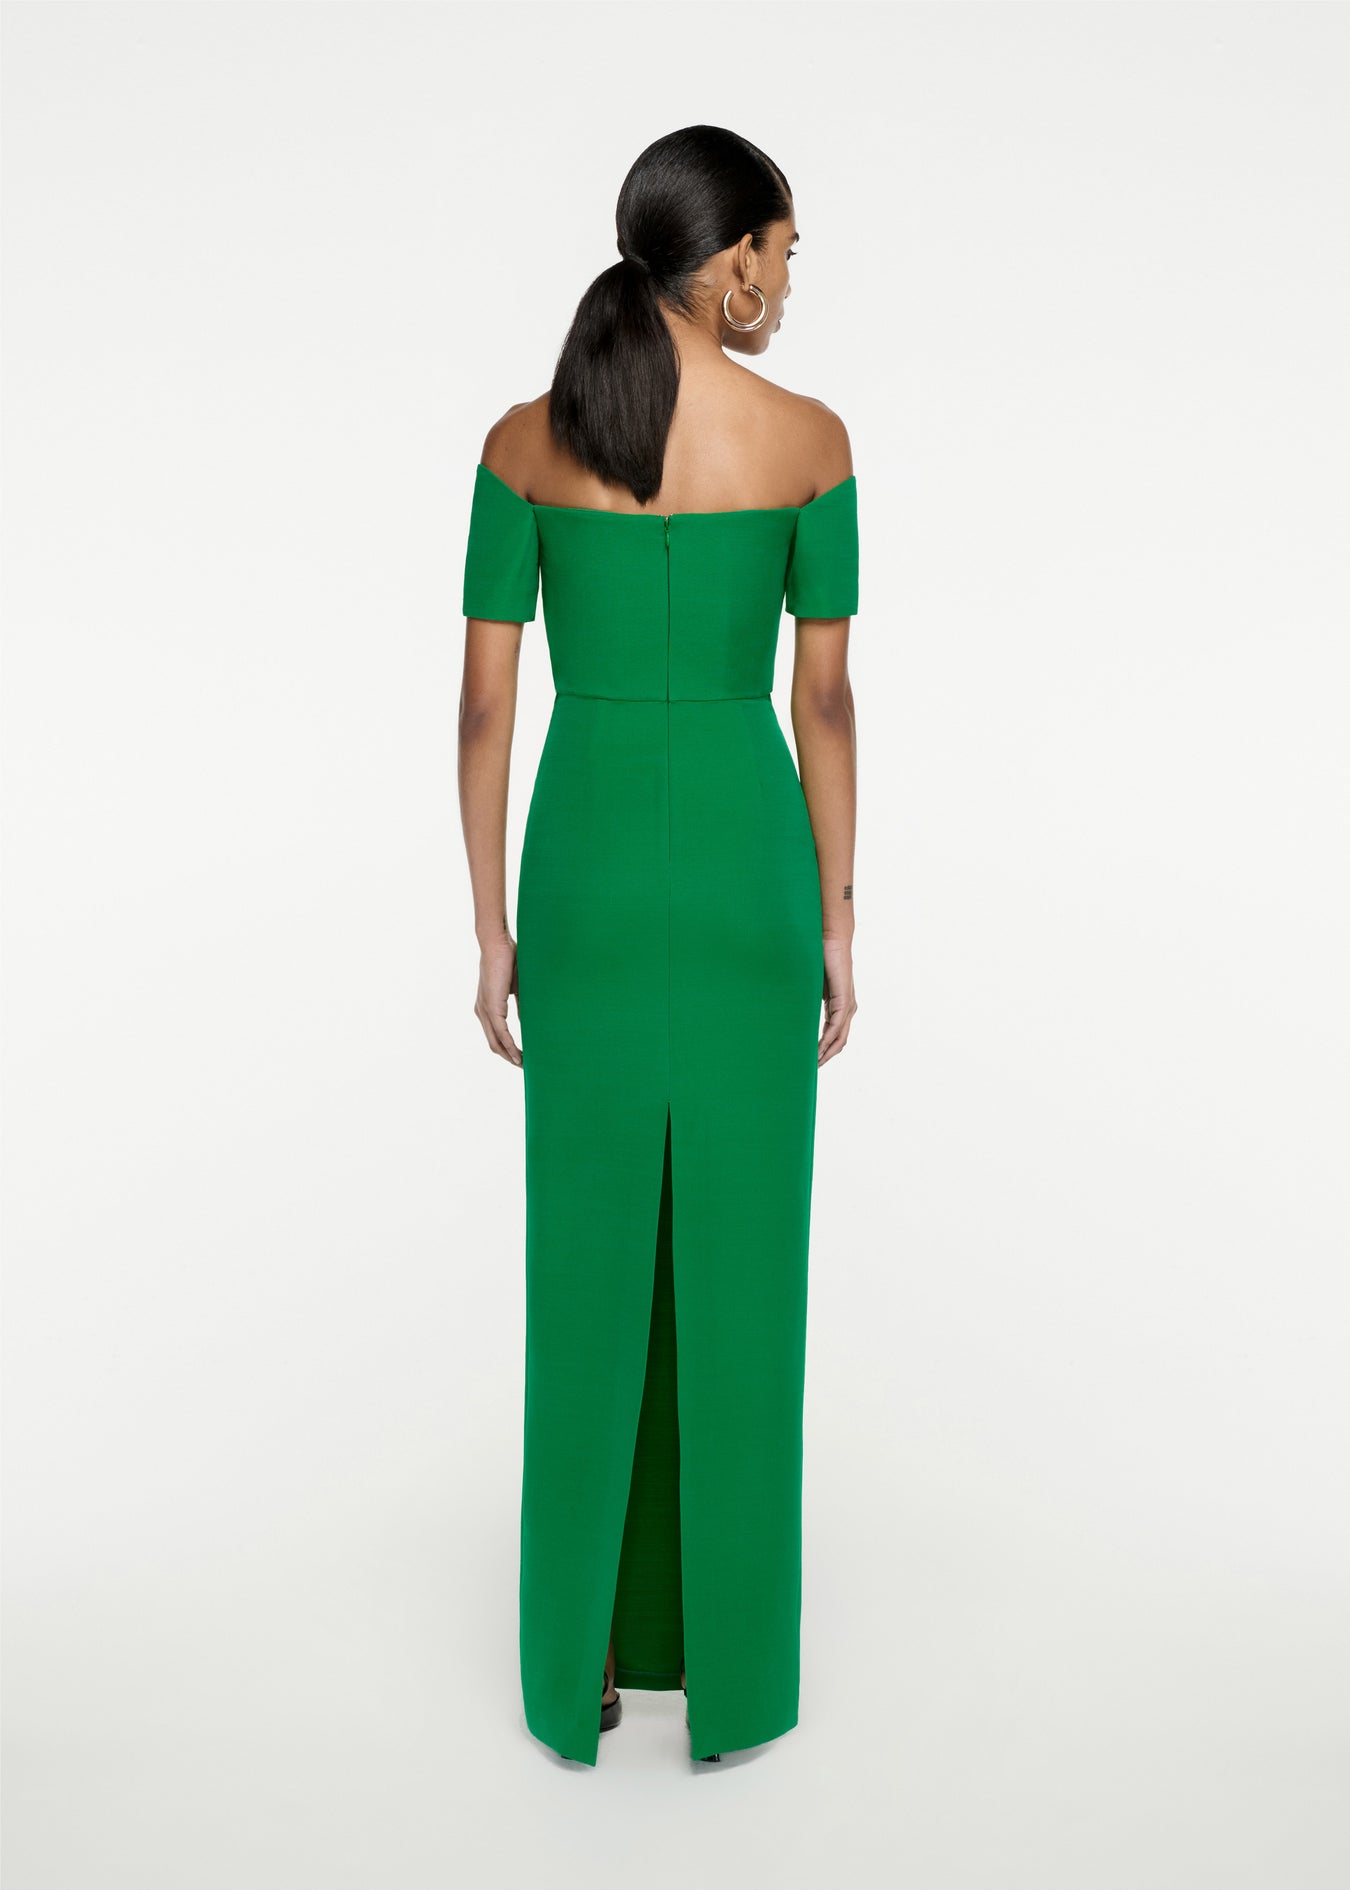 The back of a woman wearing the Asymmetric Silk Wool Maxi Dress in Green